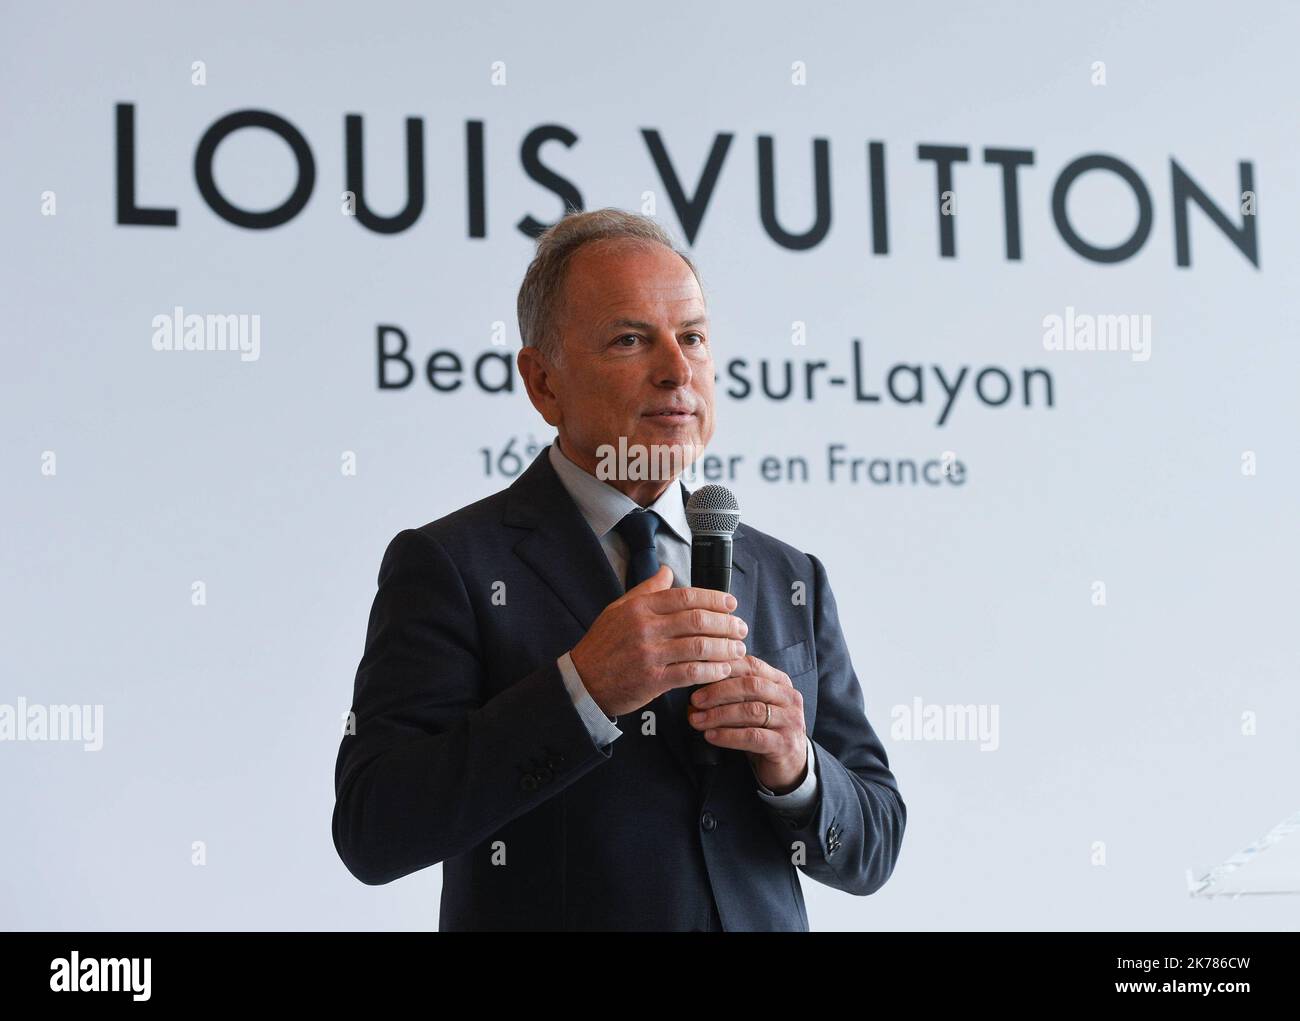 A Louis Vuitton box. editorial stock image. Image of sale - 140895844